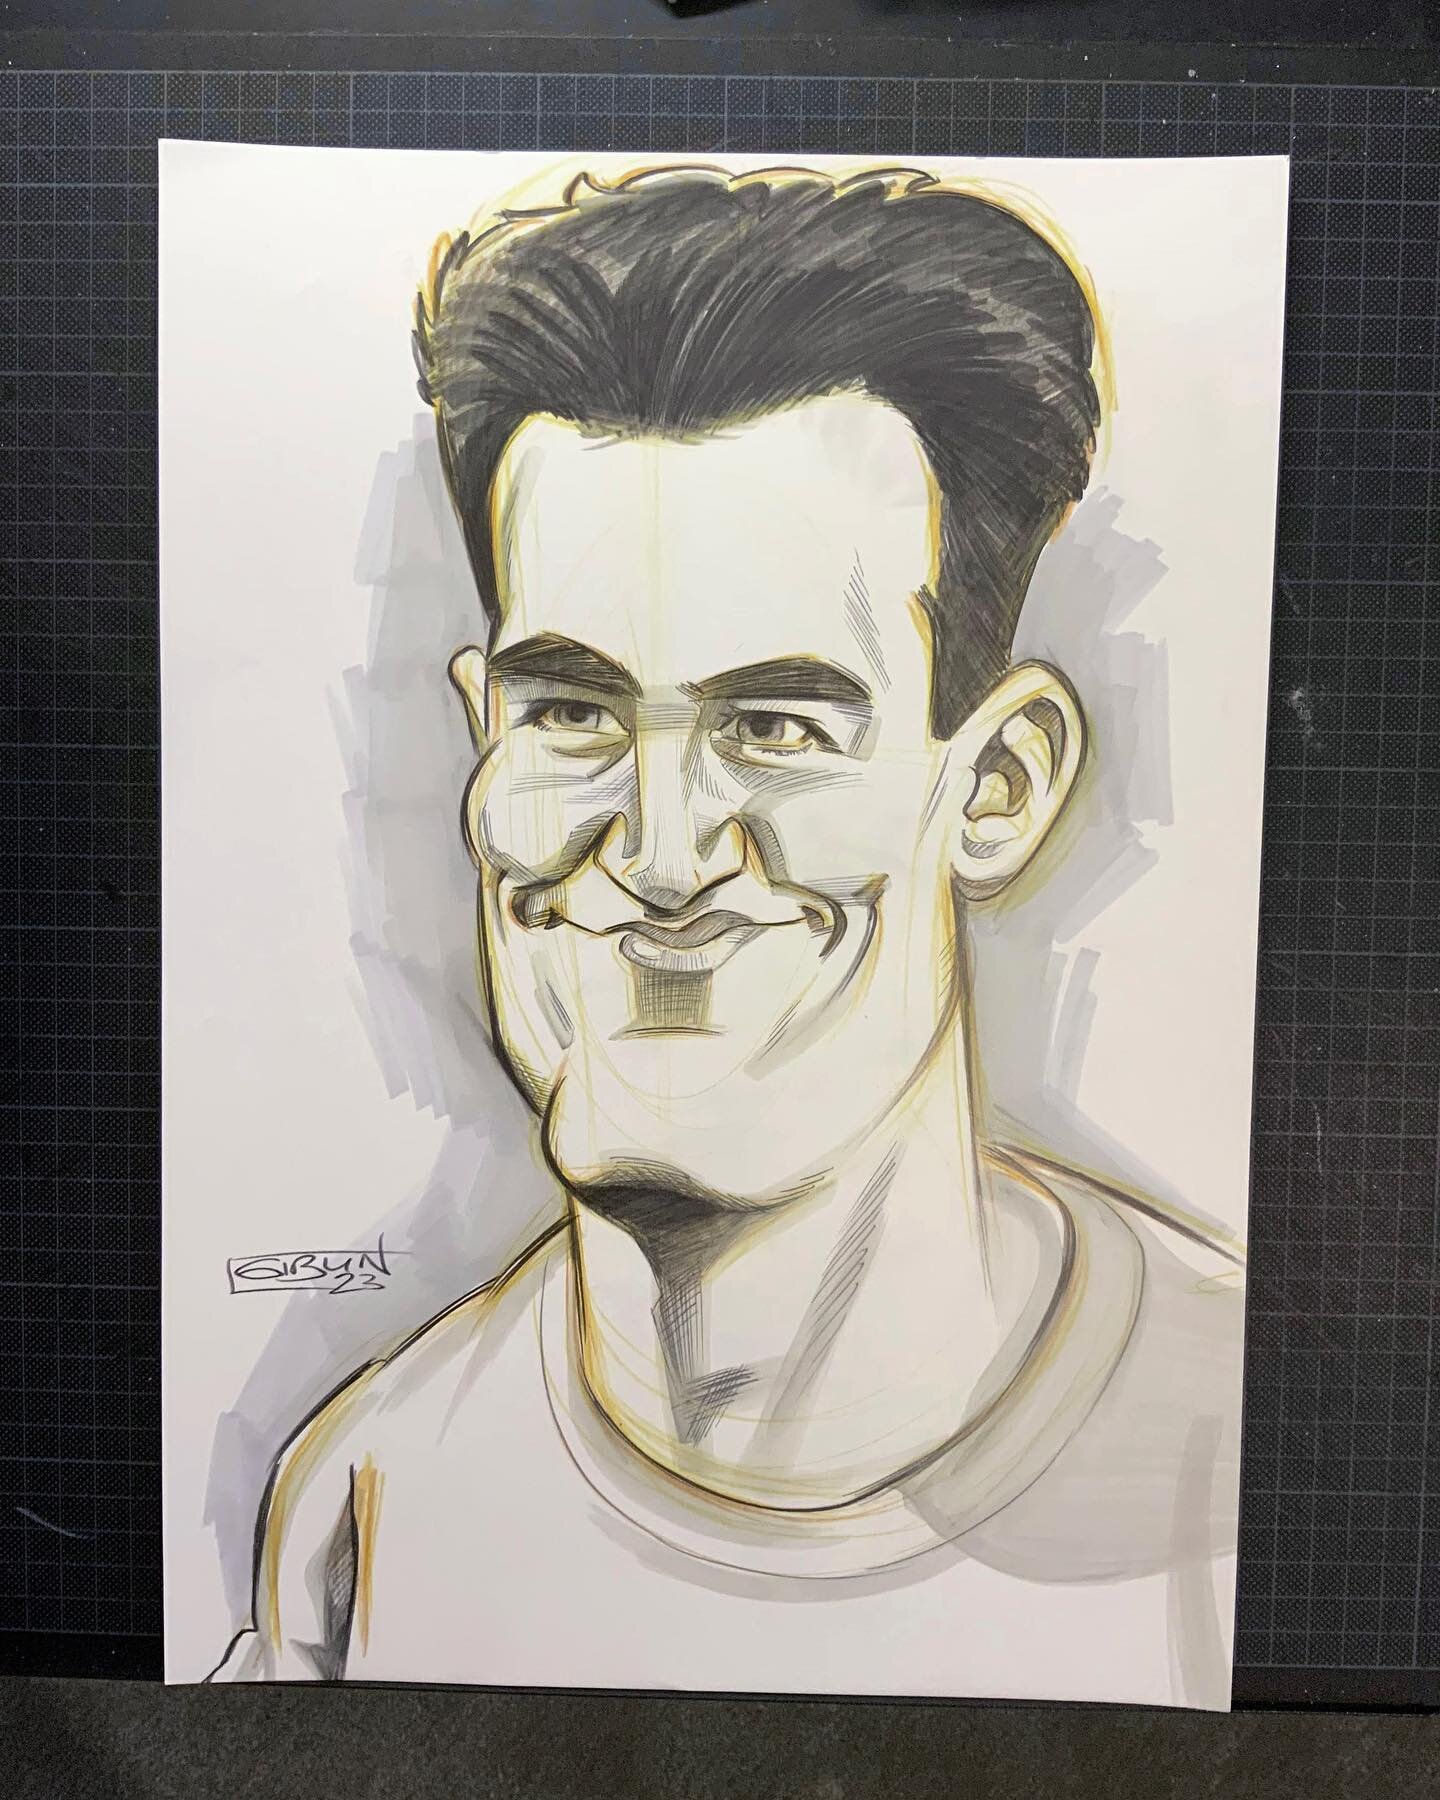 Chandler sketch commission that I completed and posted out yesterday. I&rsquo;m sure this is the version of Matthew Perry that many people will cling to and hold dear in the future. Thanks @star2104 for the job, I&rsquo;m thrilled you like it. 😊

Ch